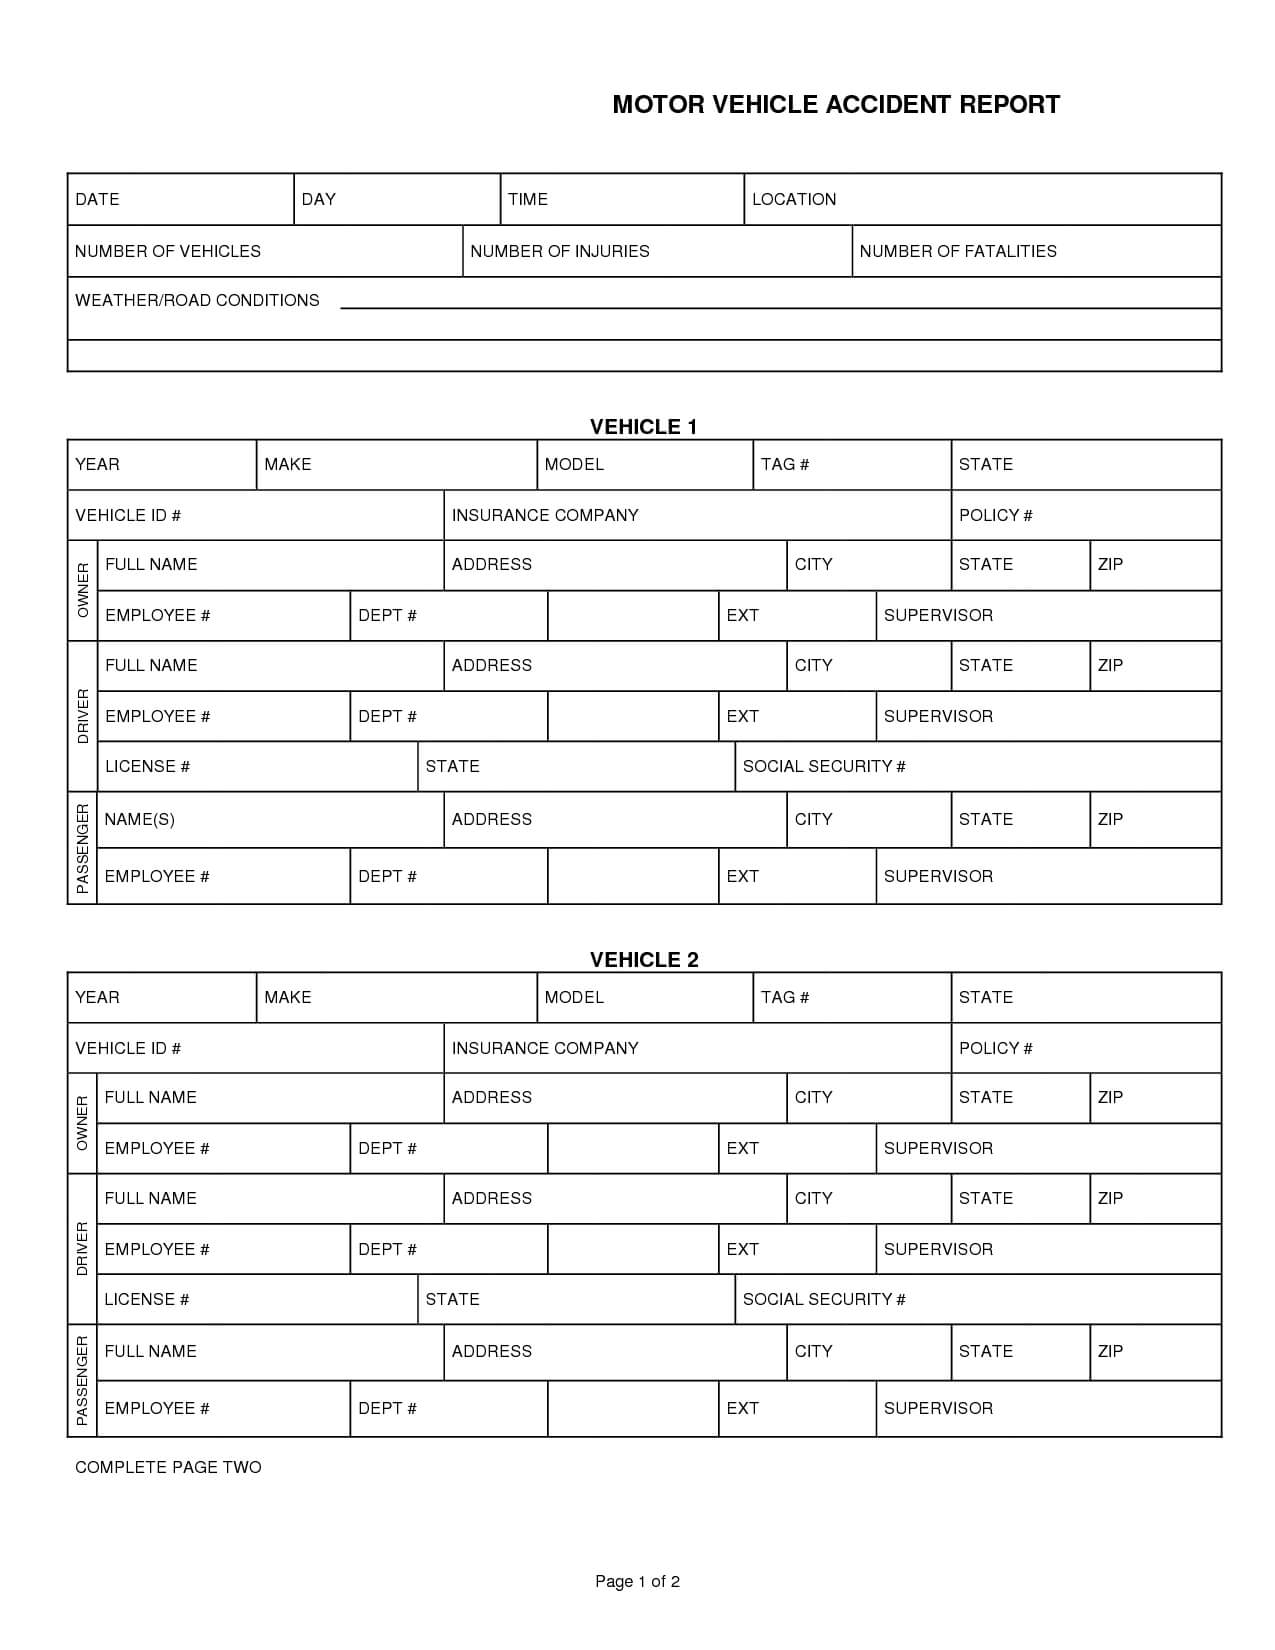 008 Car Accident Report Form Template 290132 Vehicle Intended For Motor Vehicle Accident Report Form Template